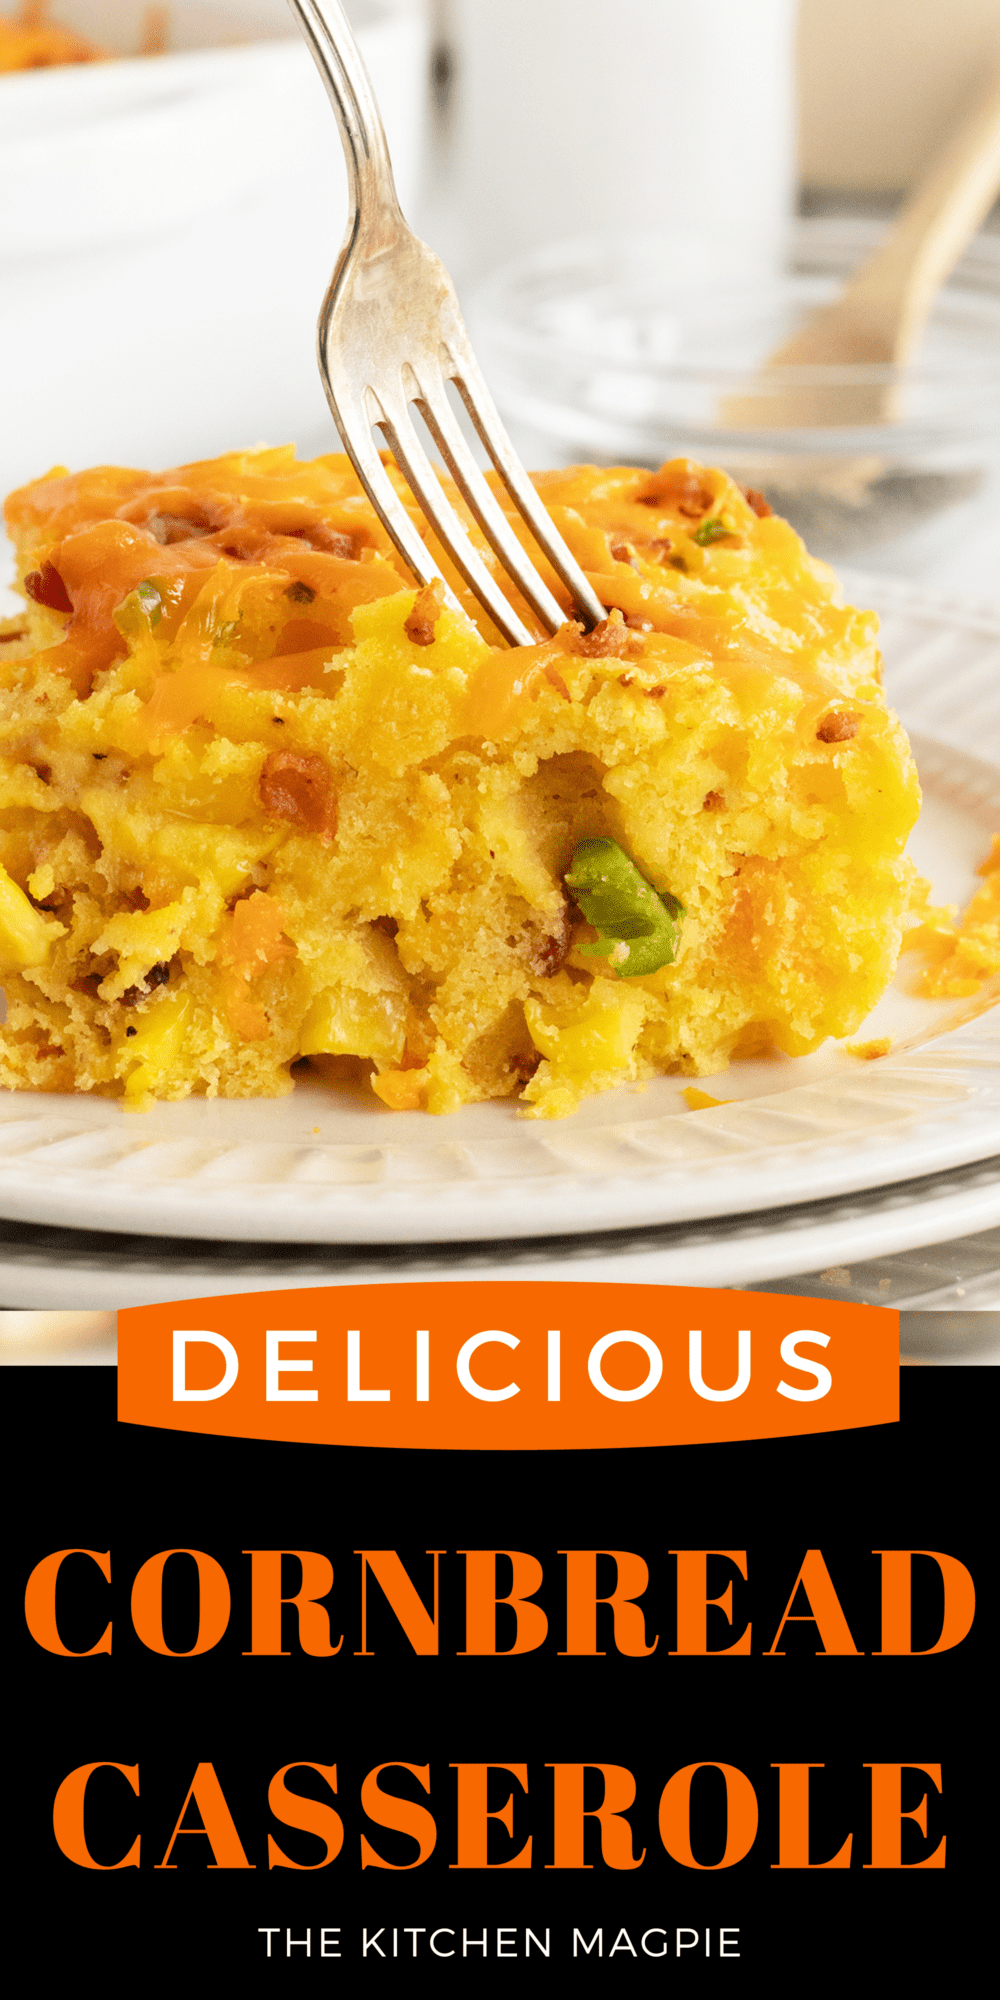 This cornbread casserole is loaded up with bacon, jalapenos and cheese making it the perfect side dish or comfort food!